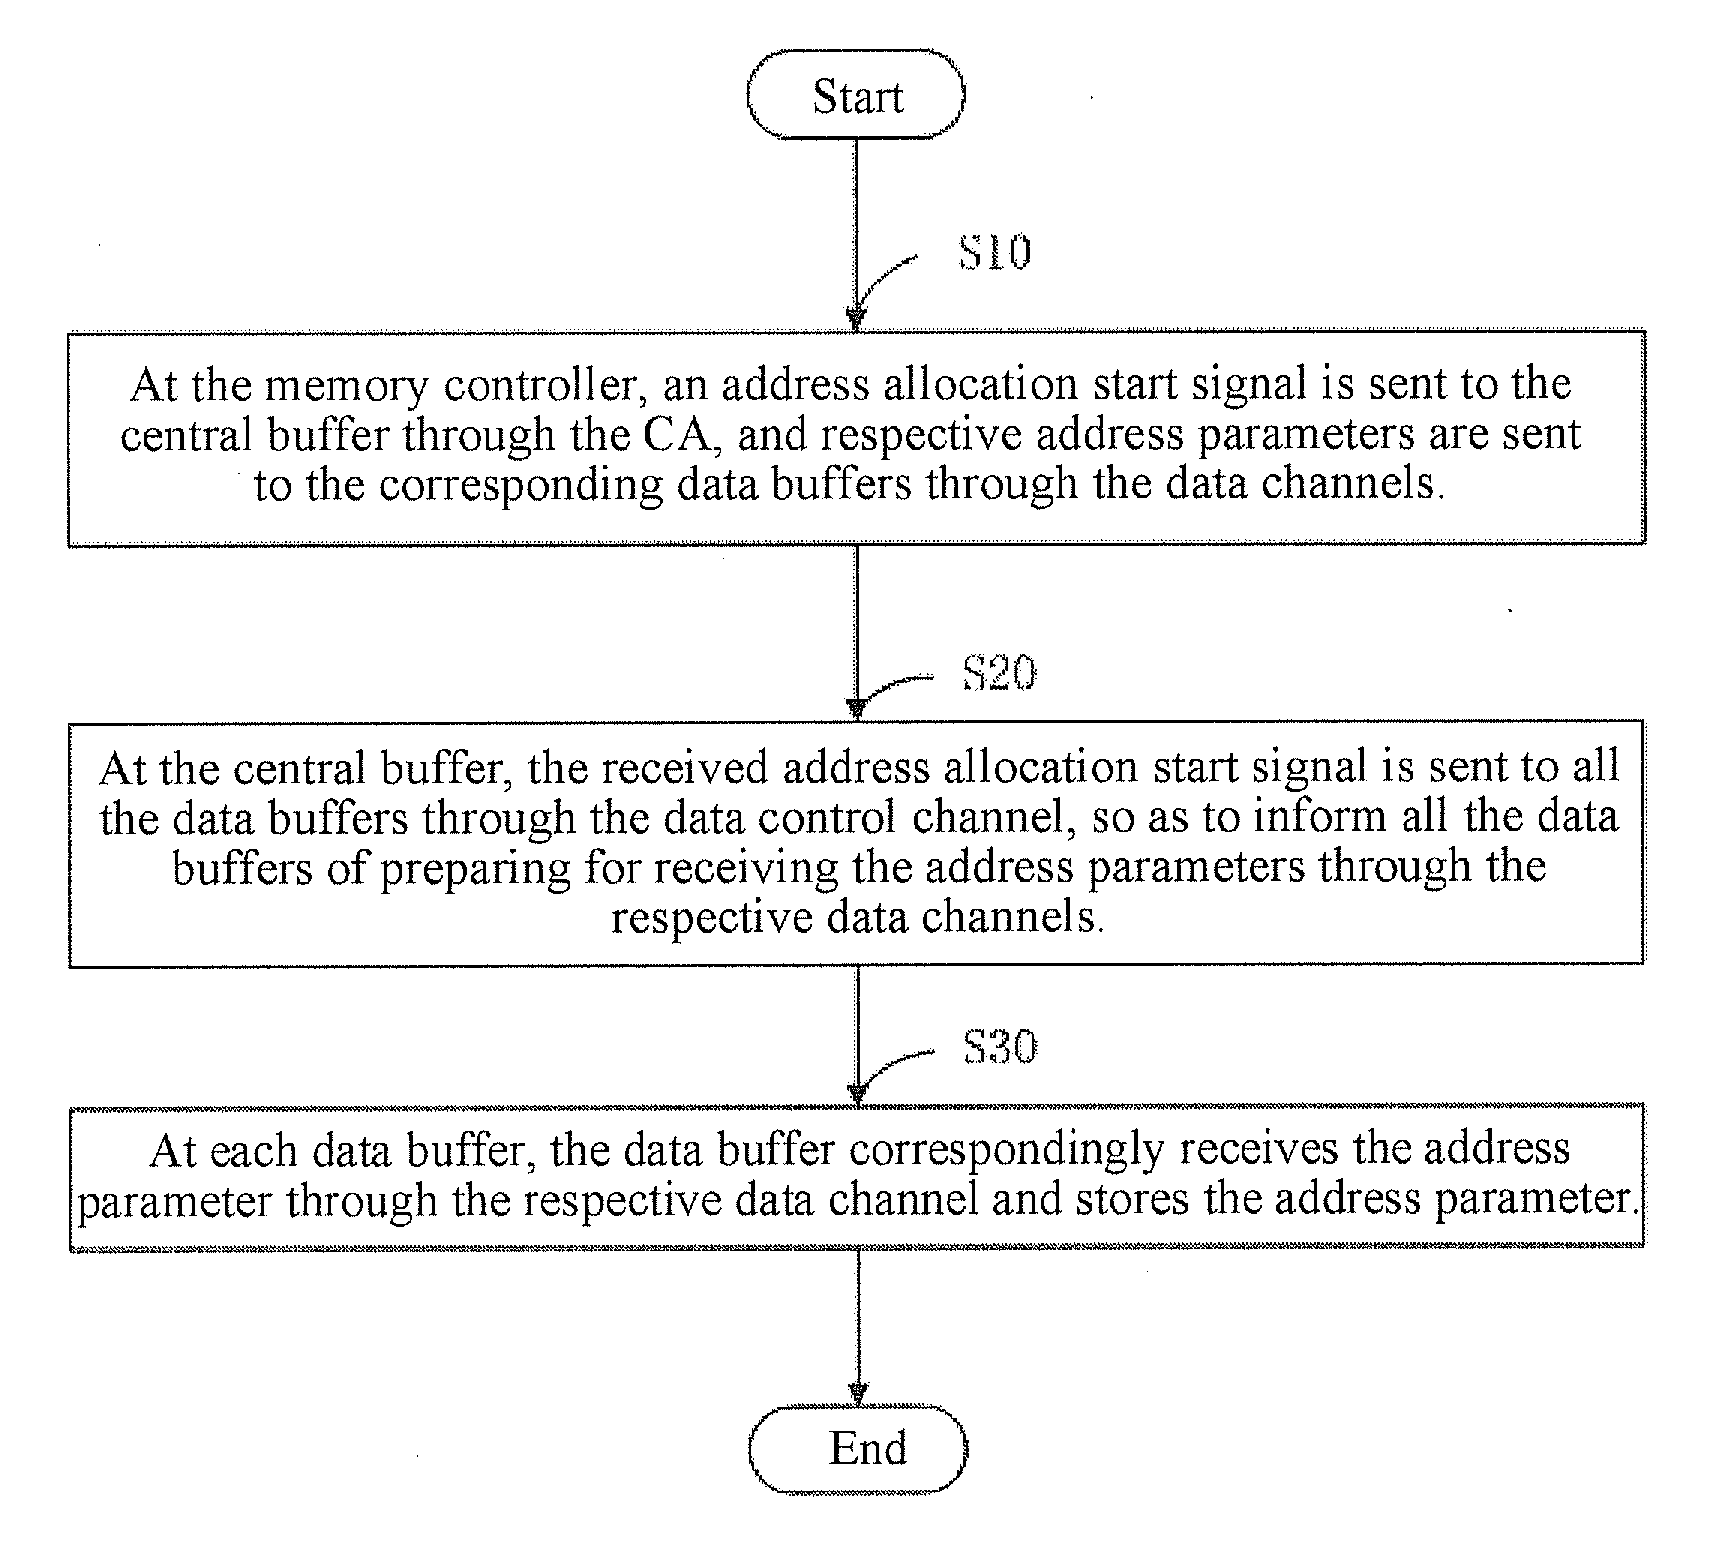 Method for allocating addresses to data buffers in distributed buffer chipset